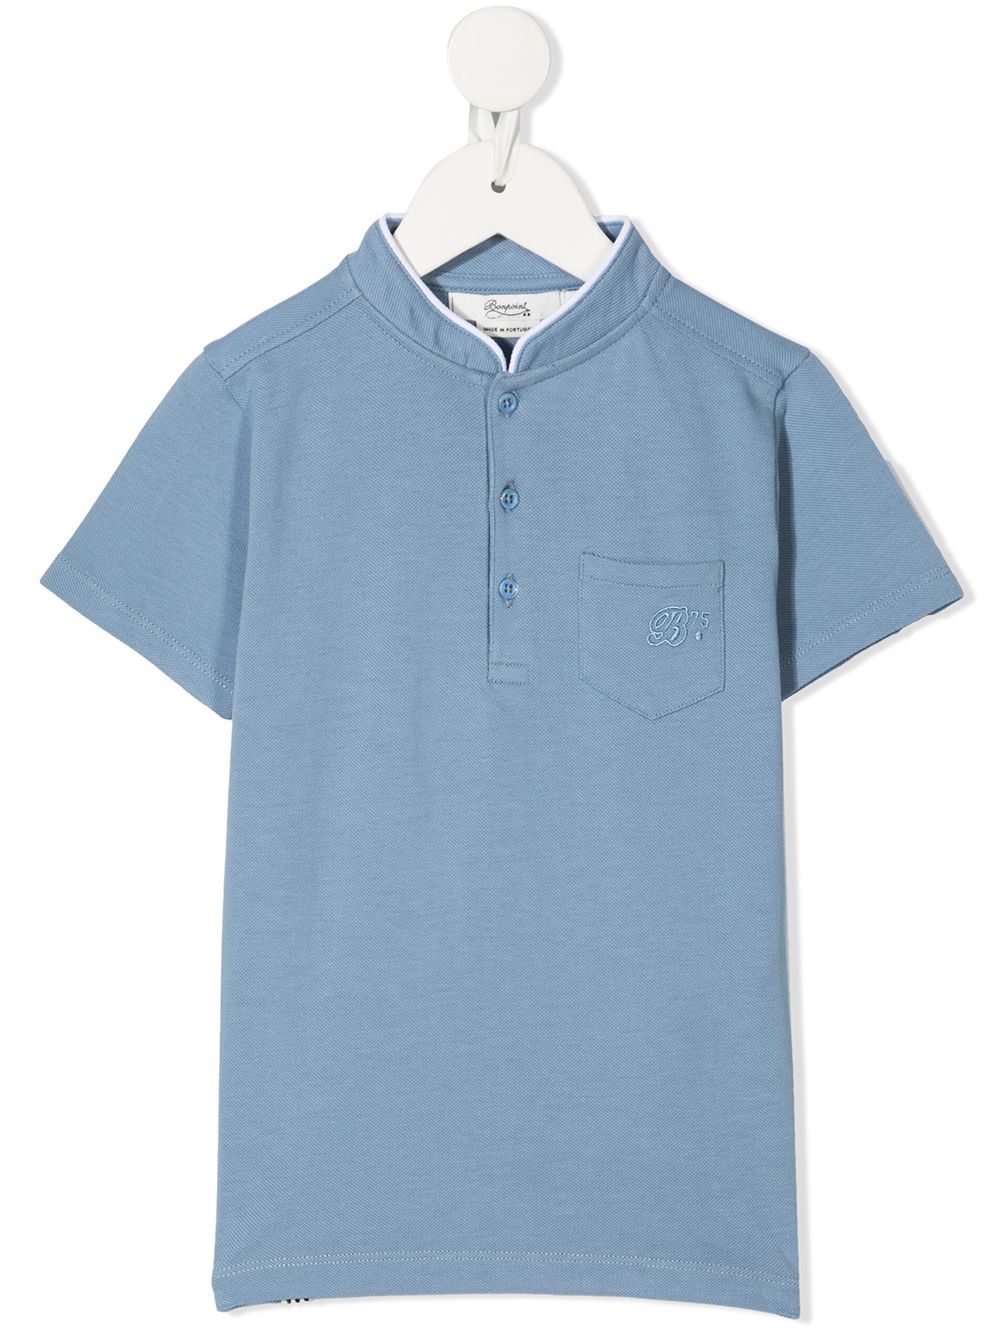 Bonpoint Kids' Chest Pocket Polo Shirt In Blue